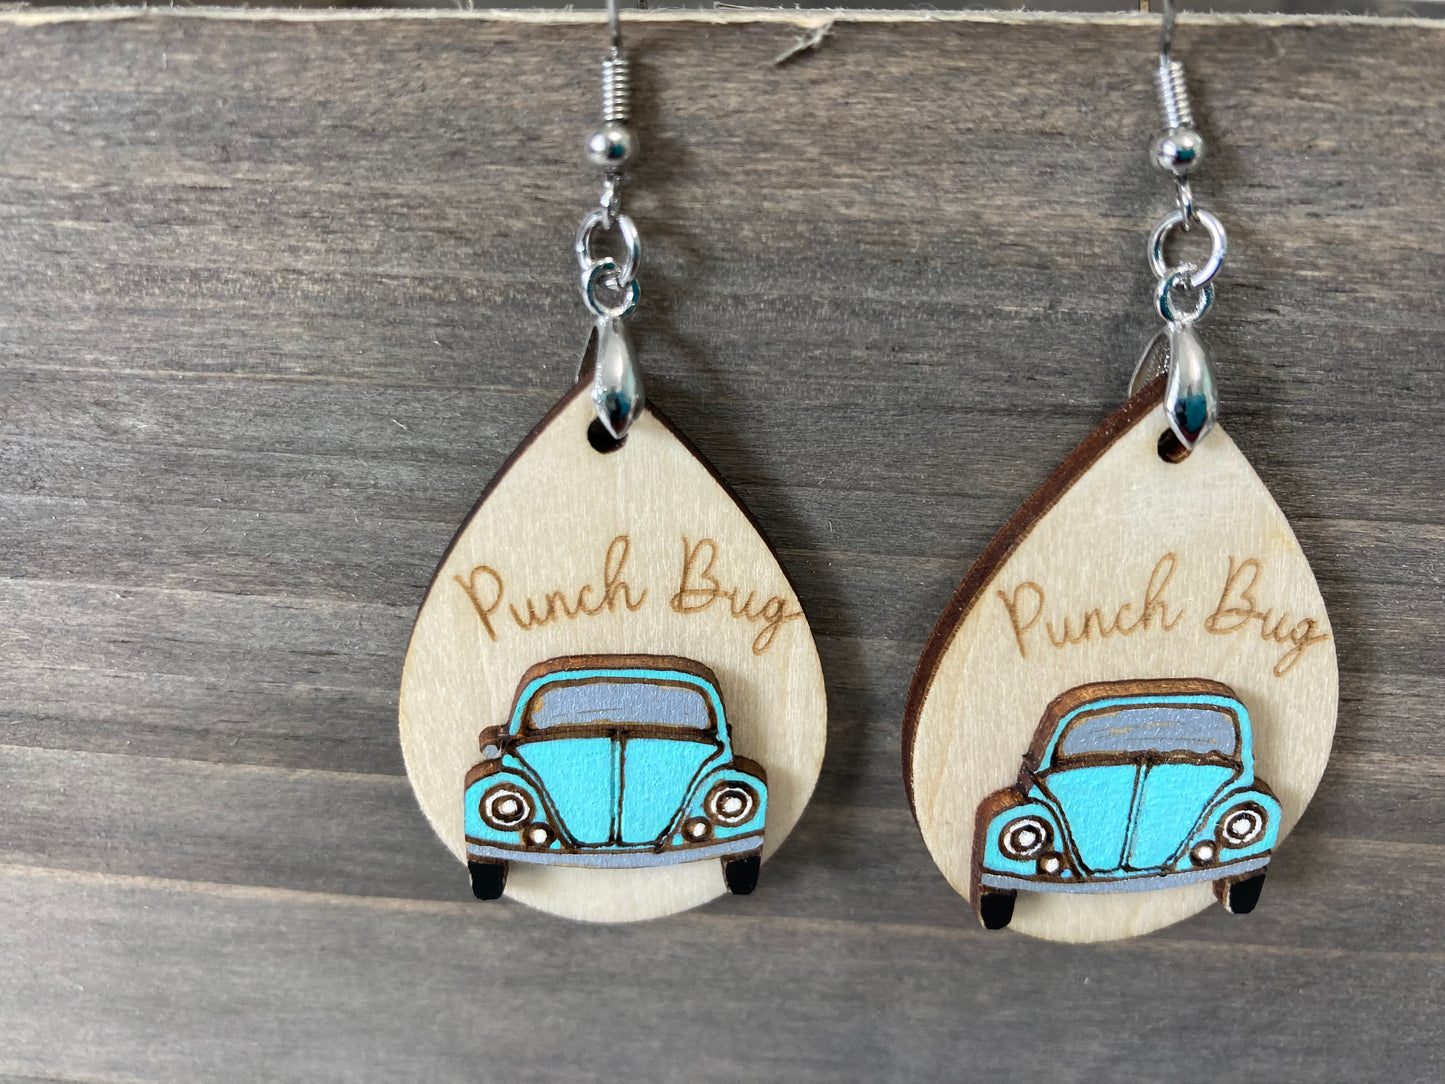 Hand painted Punch bug earrings